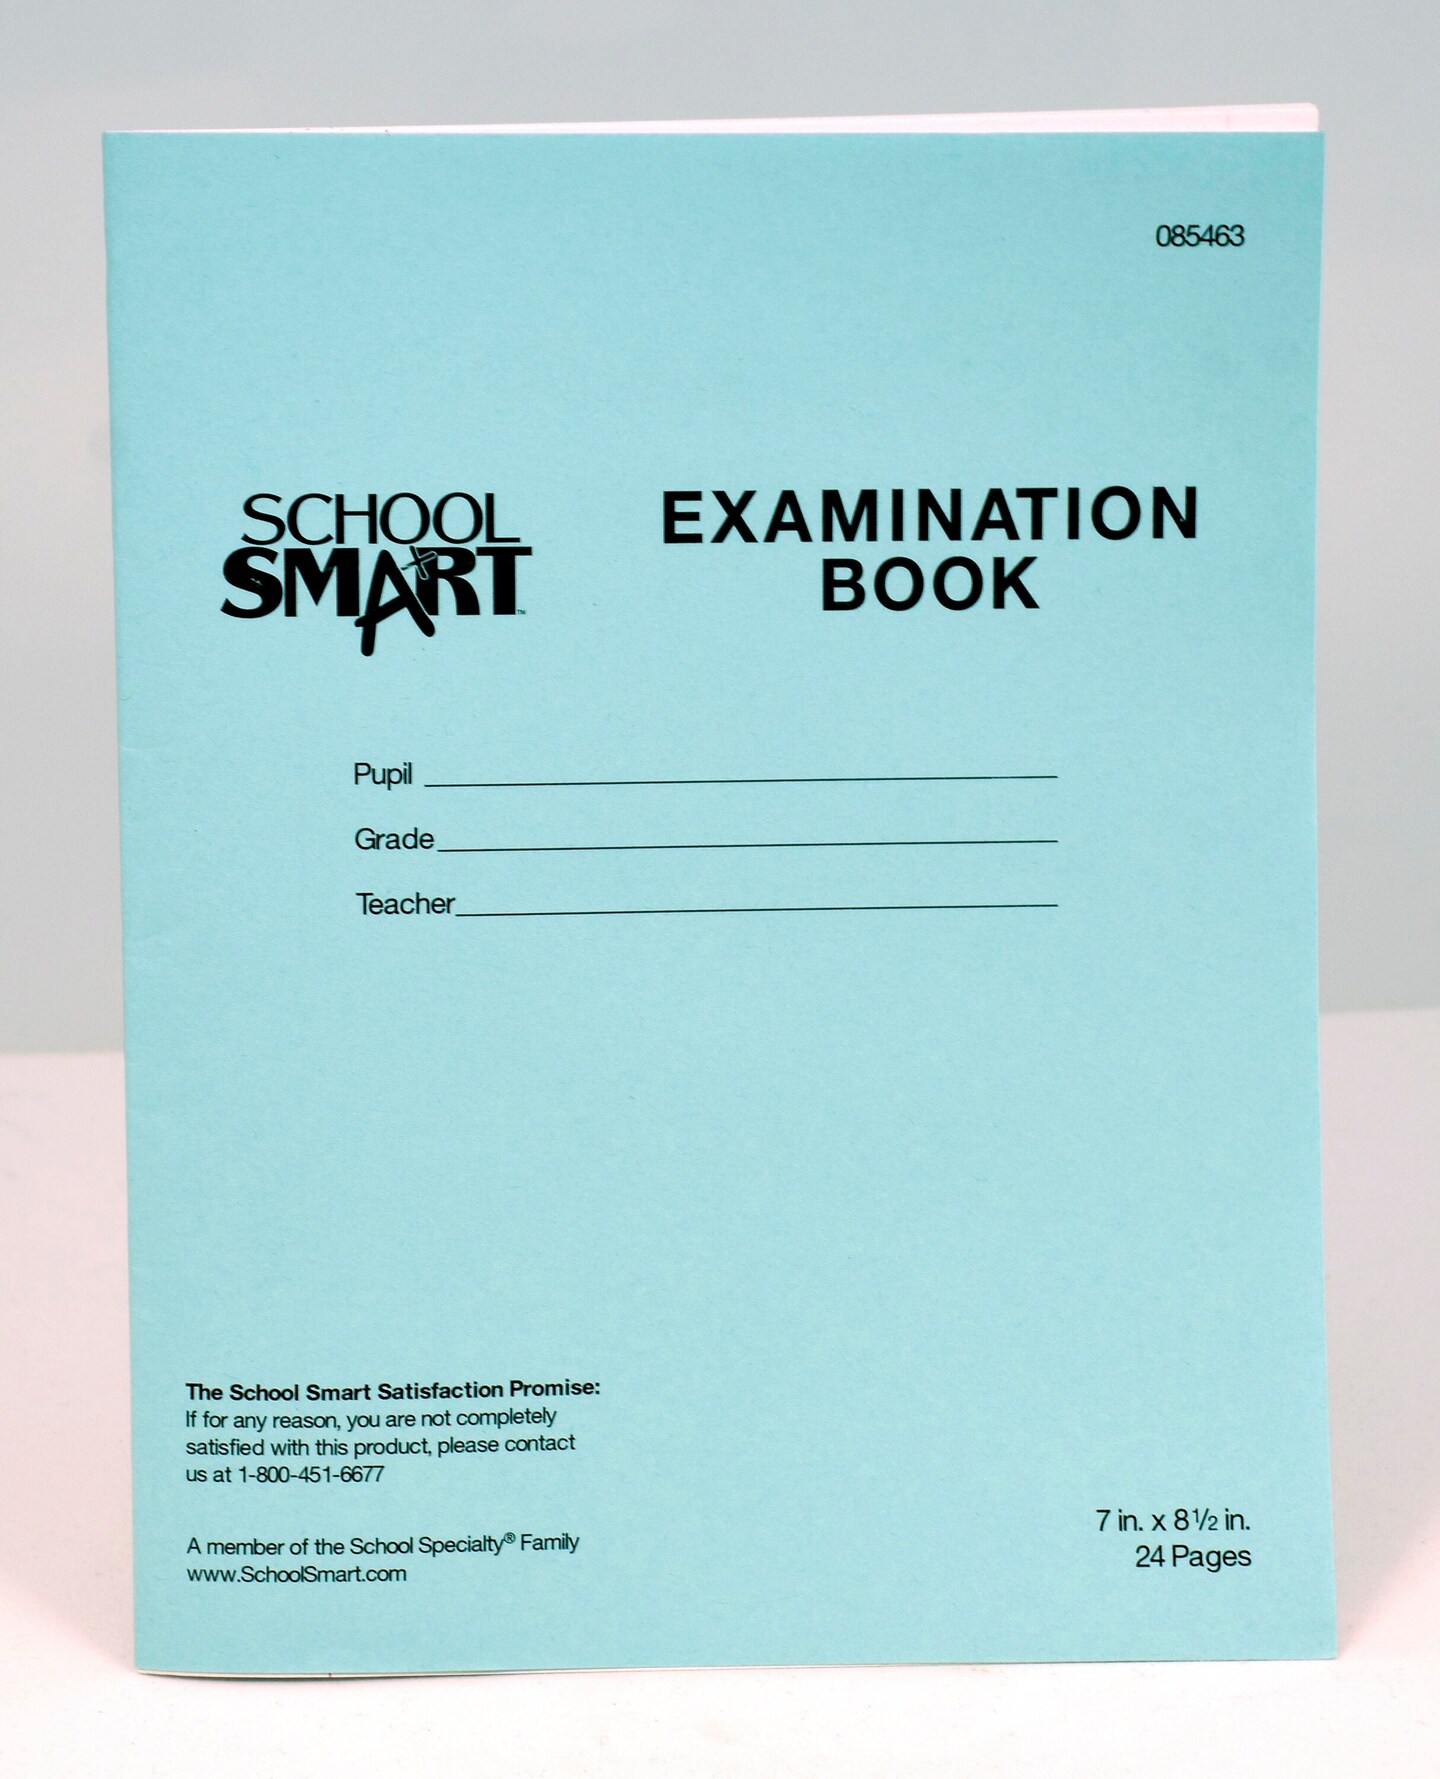 School Smart Examination Blue Book with 24 Pages, 7 x 8-1/2 Inches, Pack of 50 Books